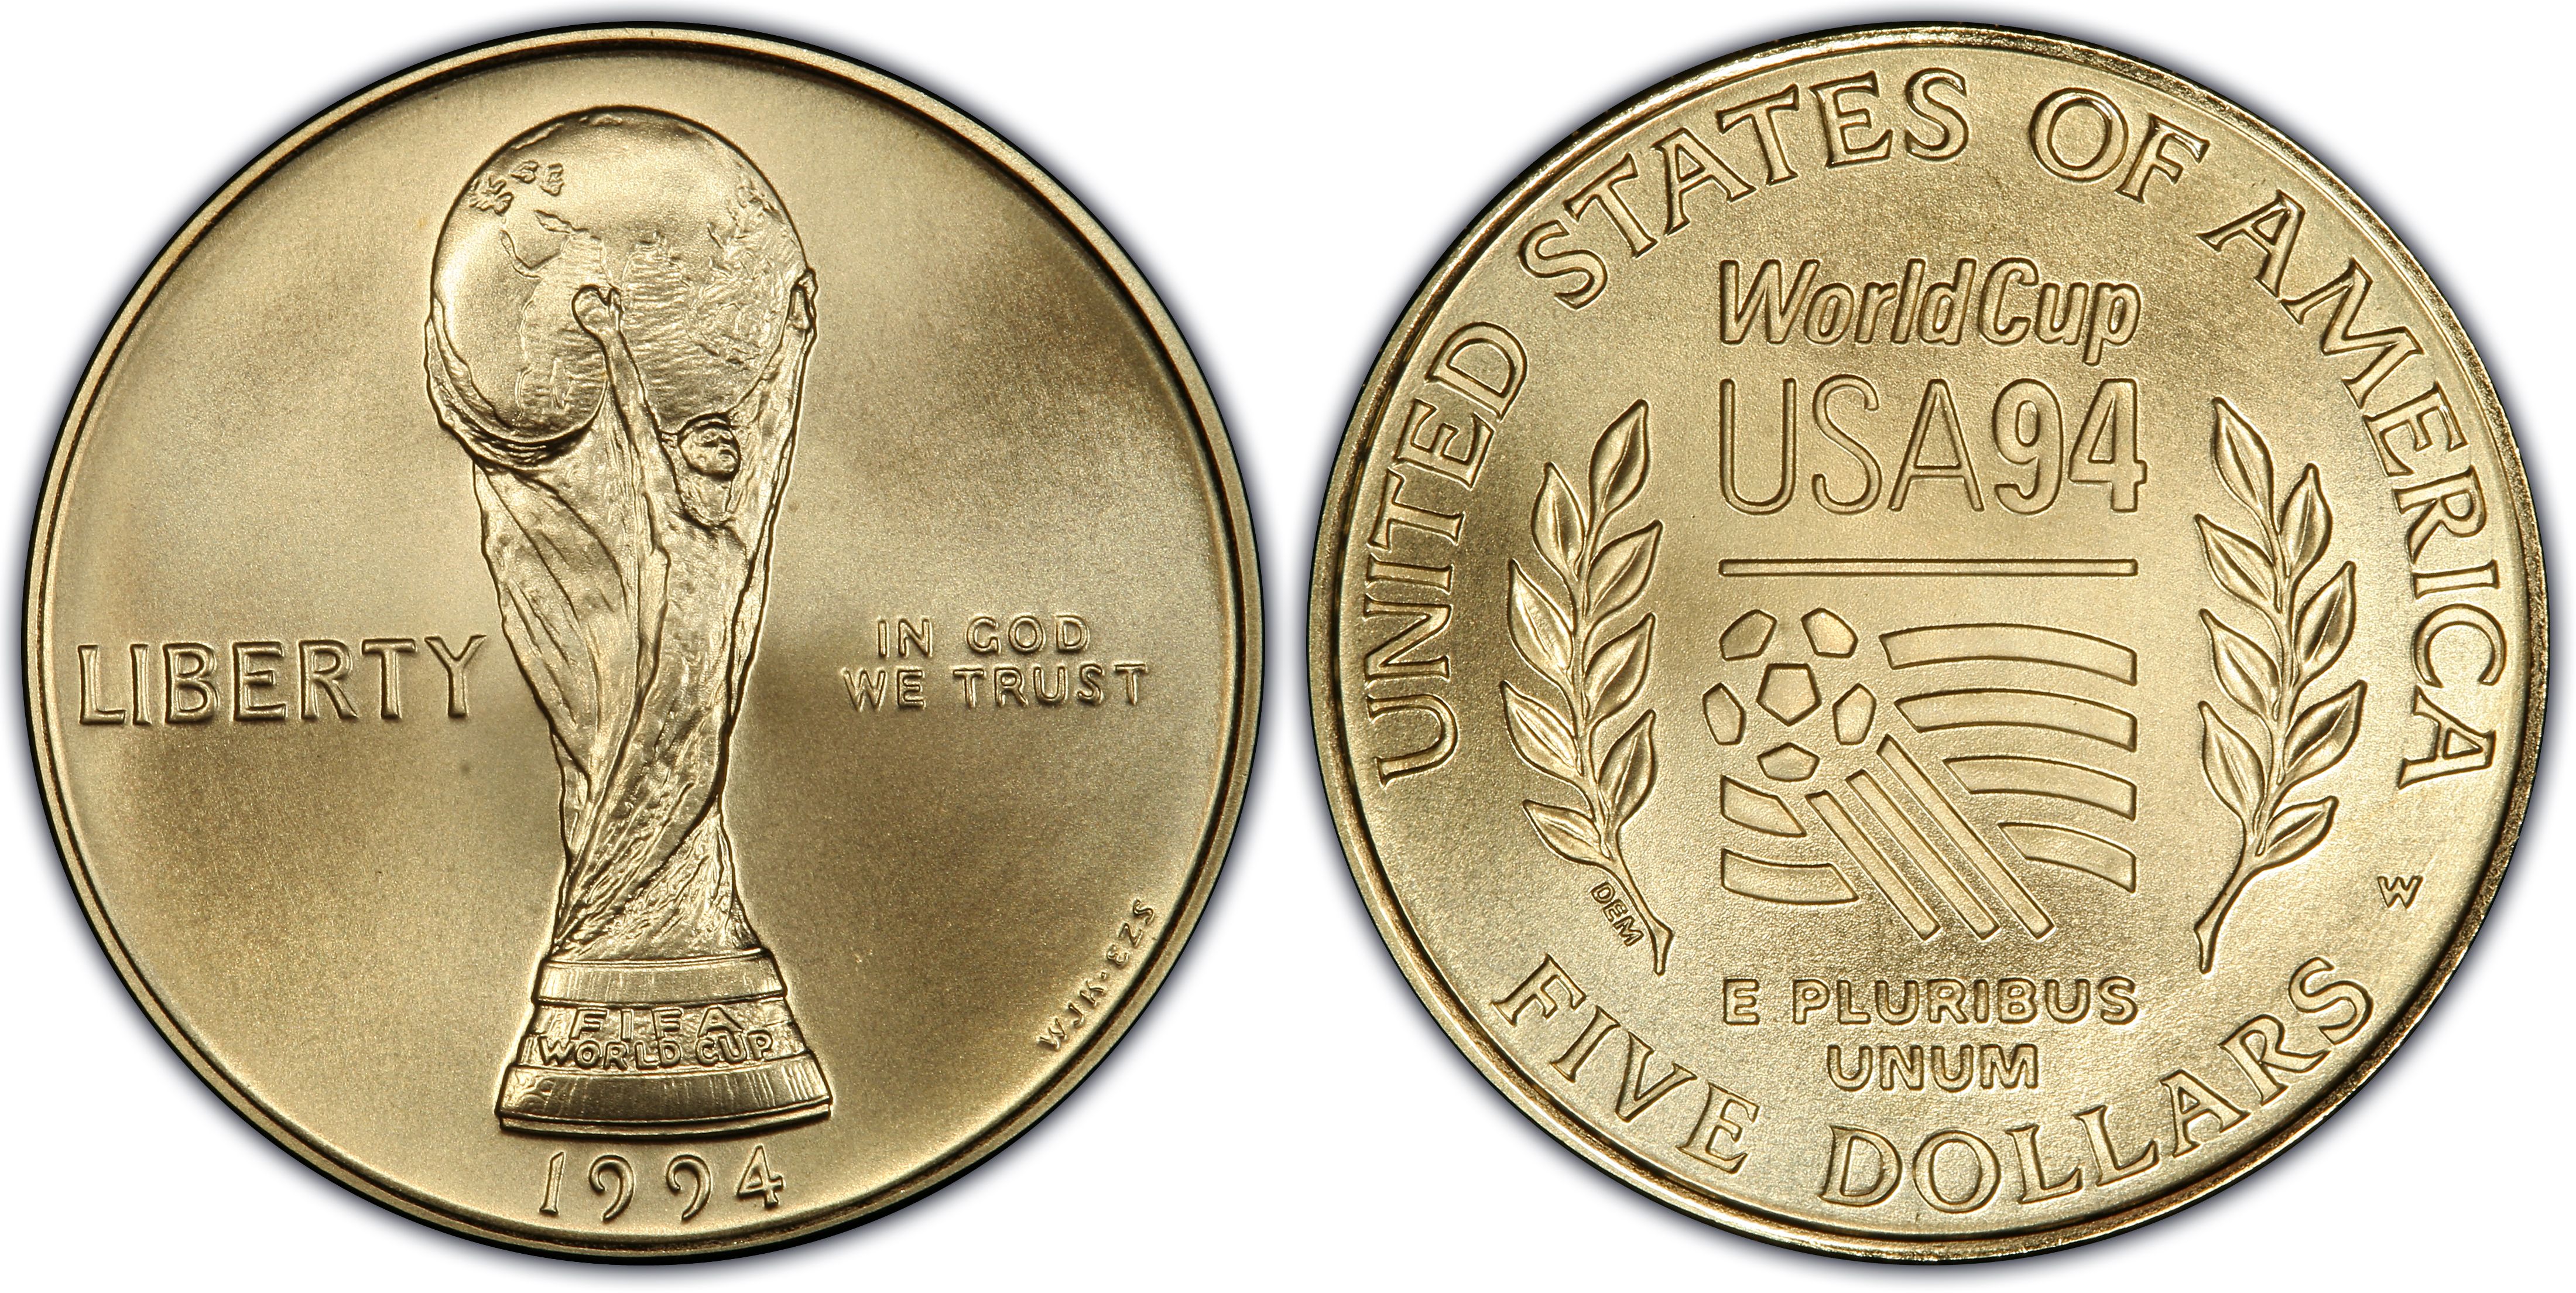 Coin in Capsule Details about   1994-W US Gold $5 World Cup Commemorative Proof 